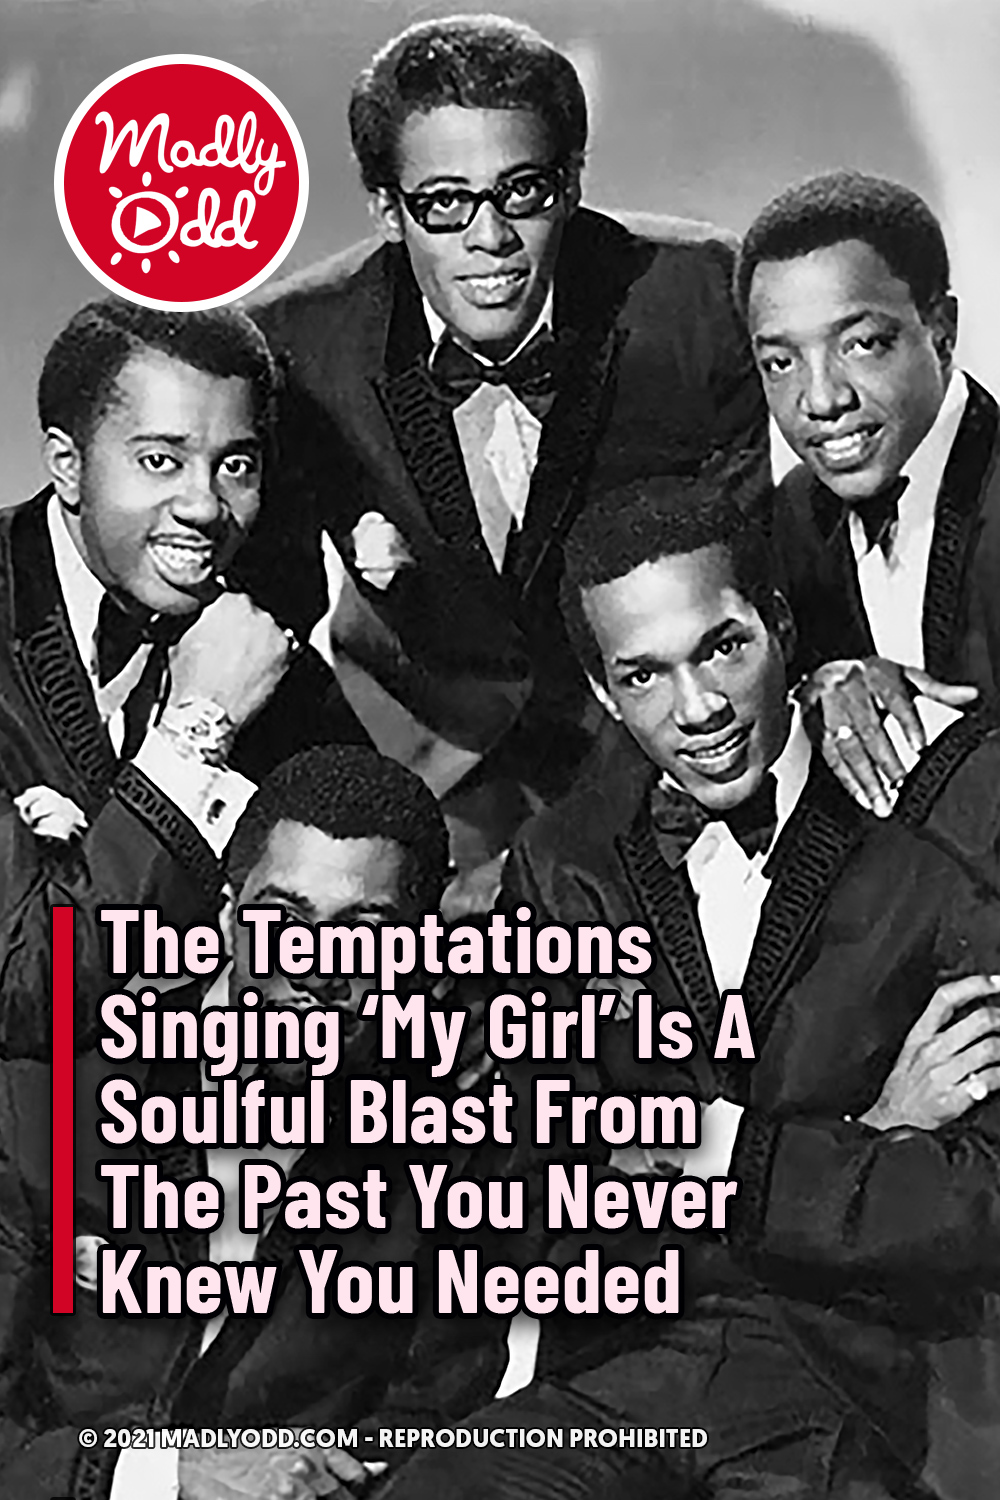 The Temptations Singing \'My Girl\' Is A Soulful Blast From The Past You Never Knew You Needed